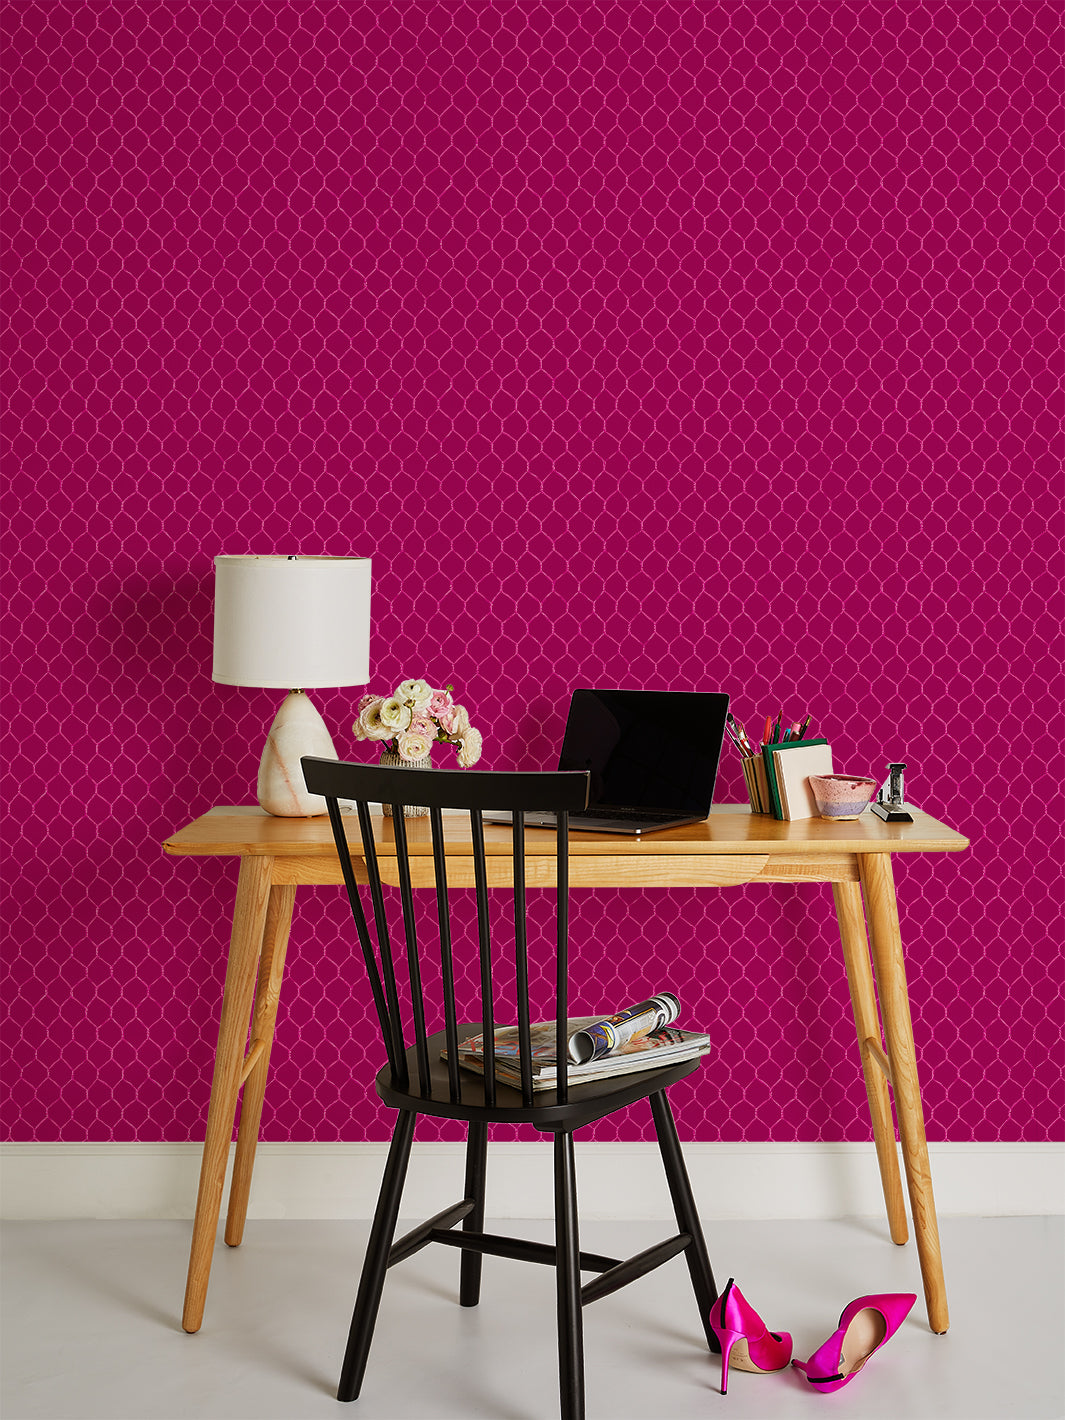 'Evelyn's Chicken Wire' Wallpaper by Sarah Jessica Parker - Punch on Raspberry